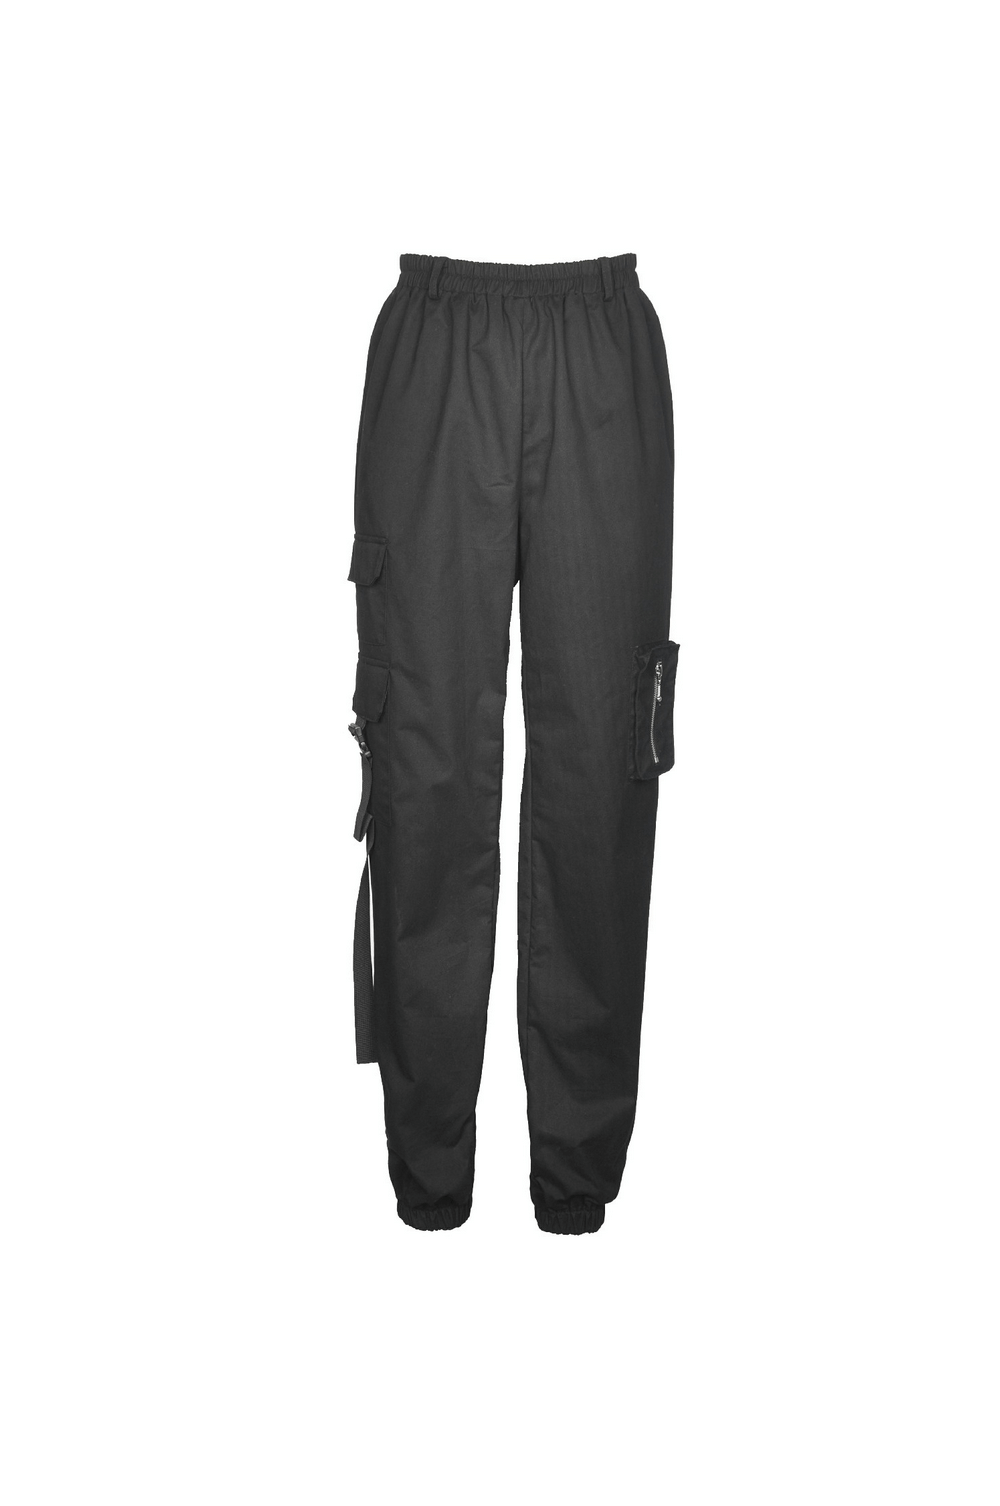 Urban-Style Black Cargo Pants with Spacious Pockets